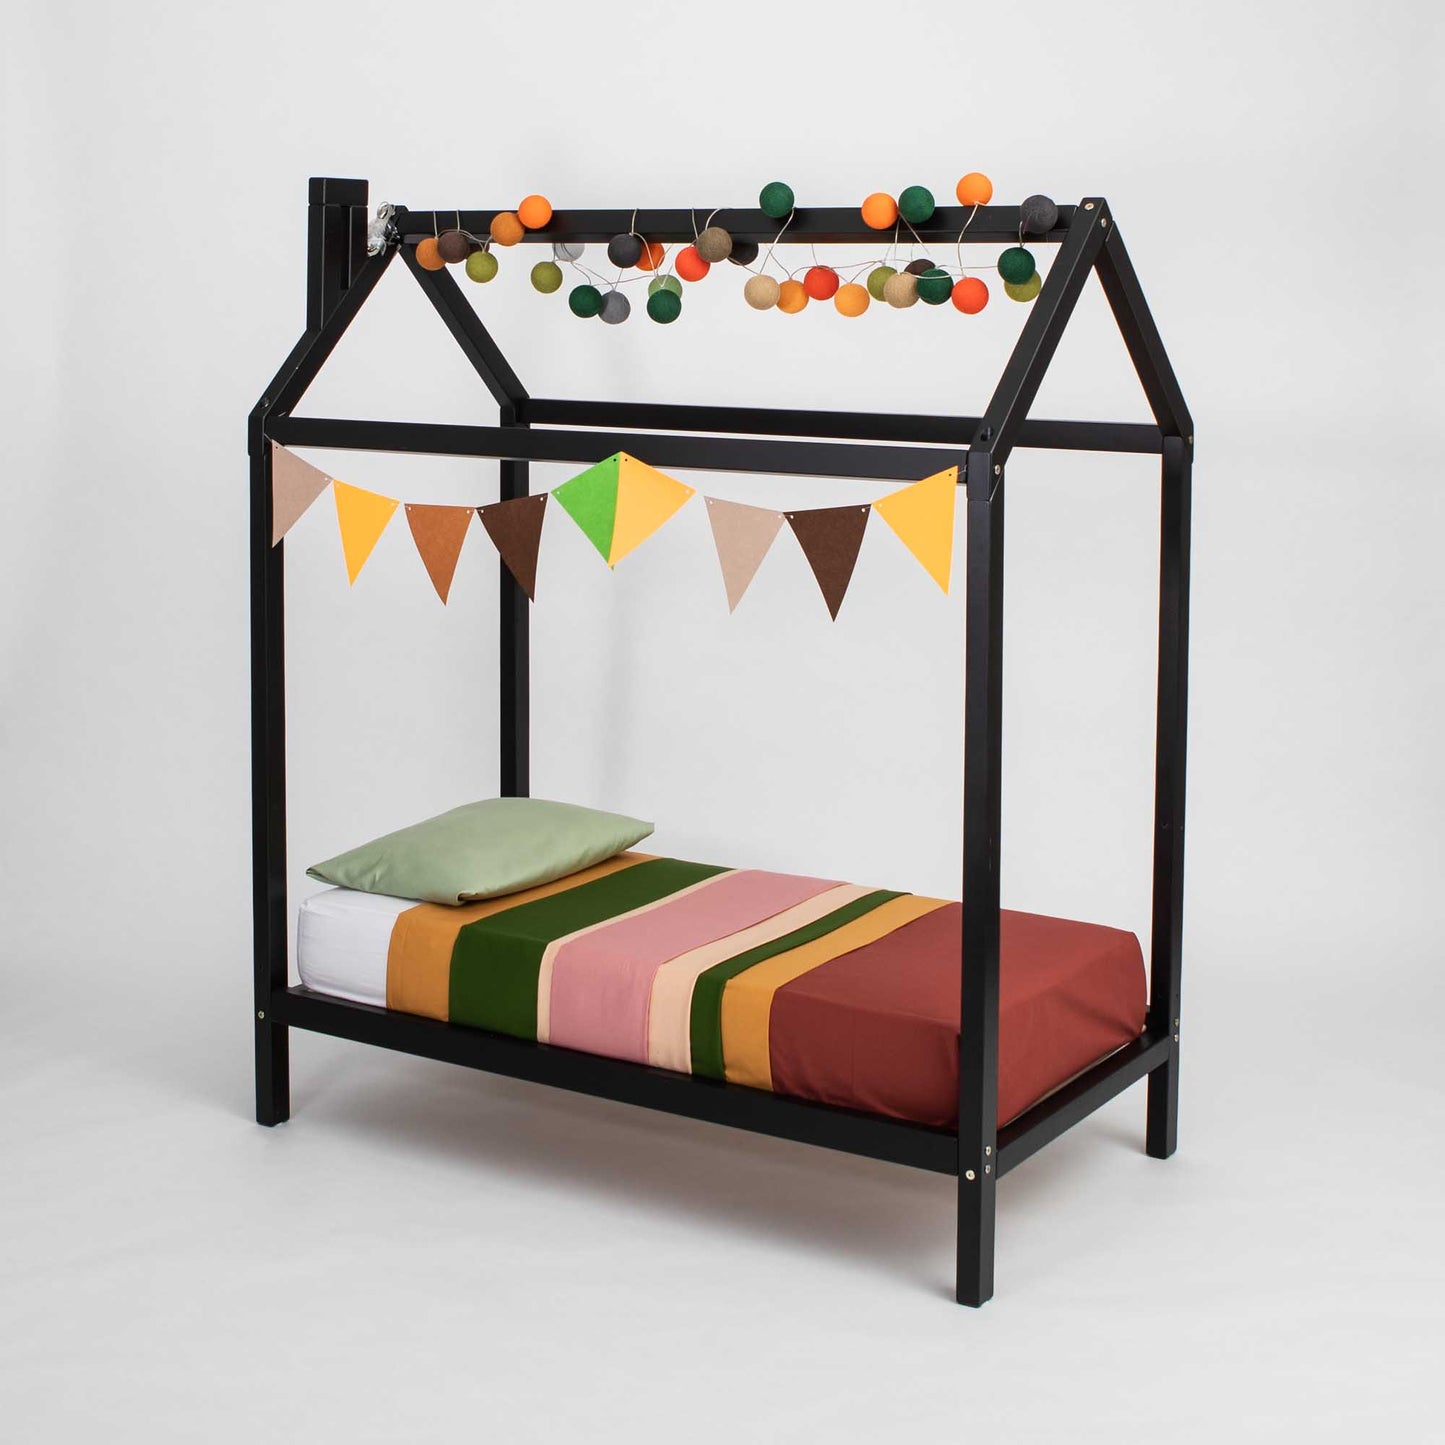 A bed with a black frame and bunting hanging from it, designed as a wooden house bed on legs.